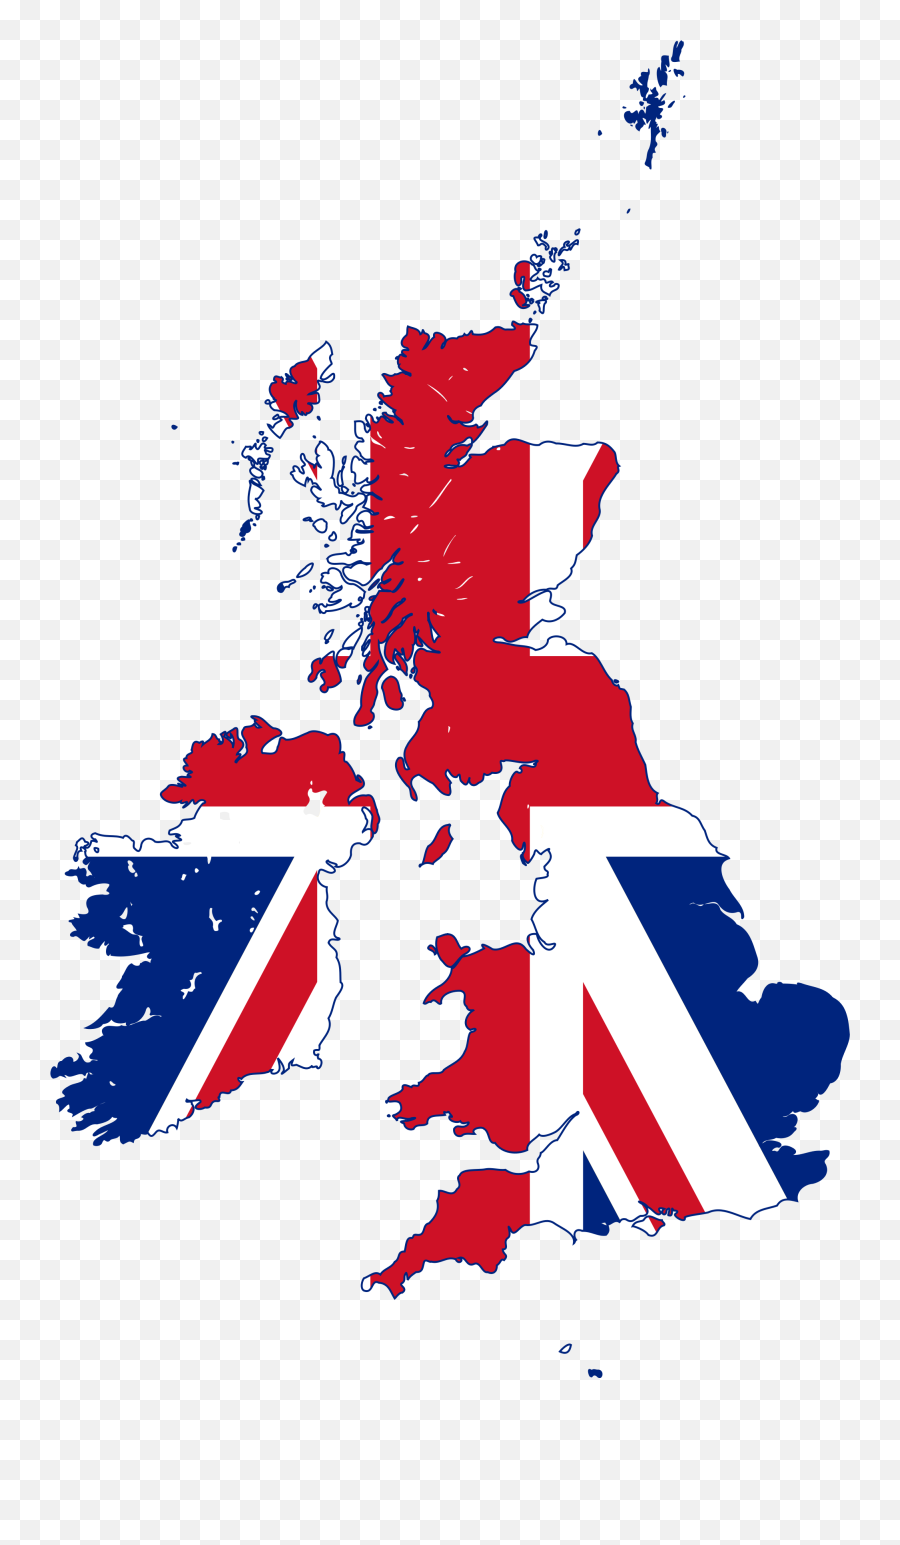 Open - Great Britain With Ireland Full Size Png Download Emoji,English Flag Emoji